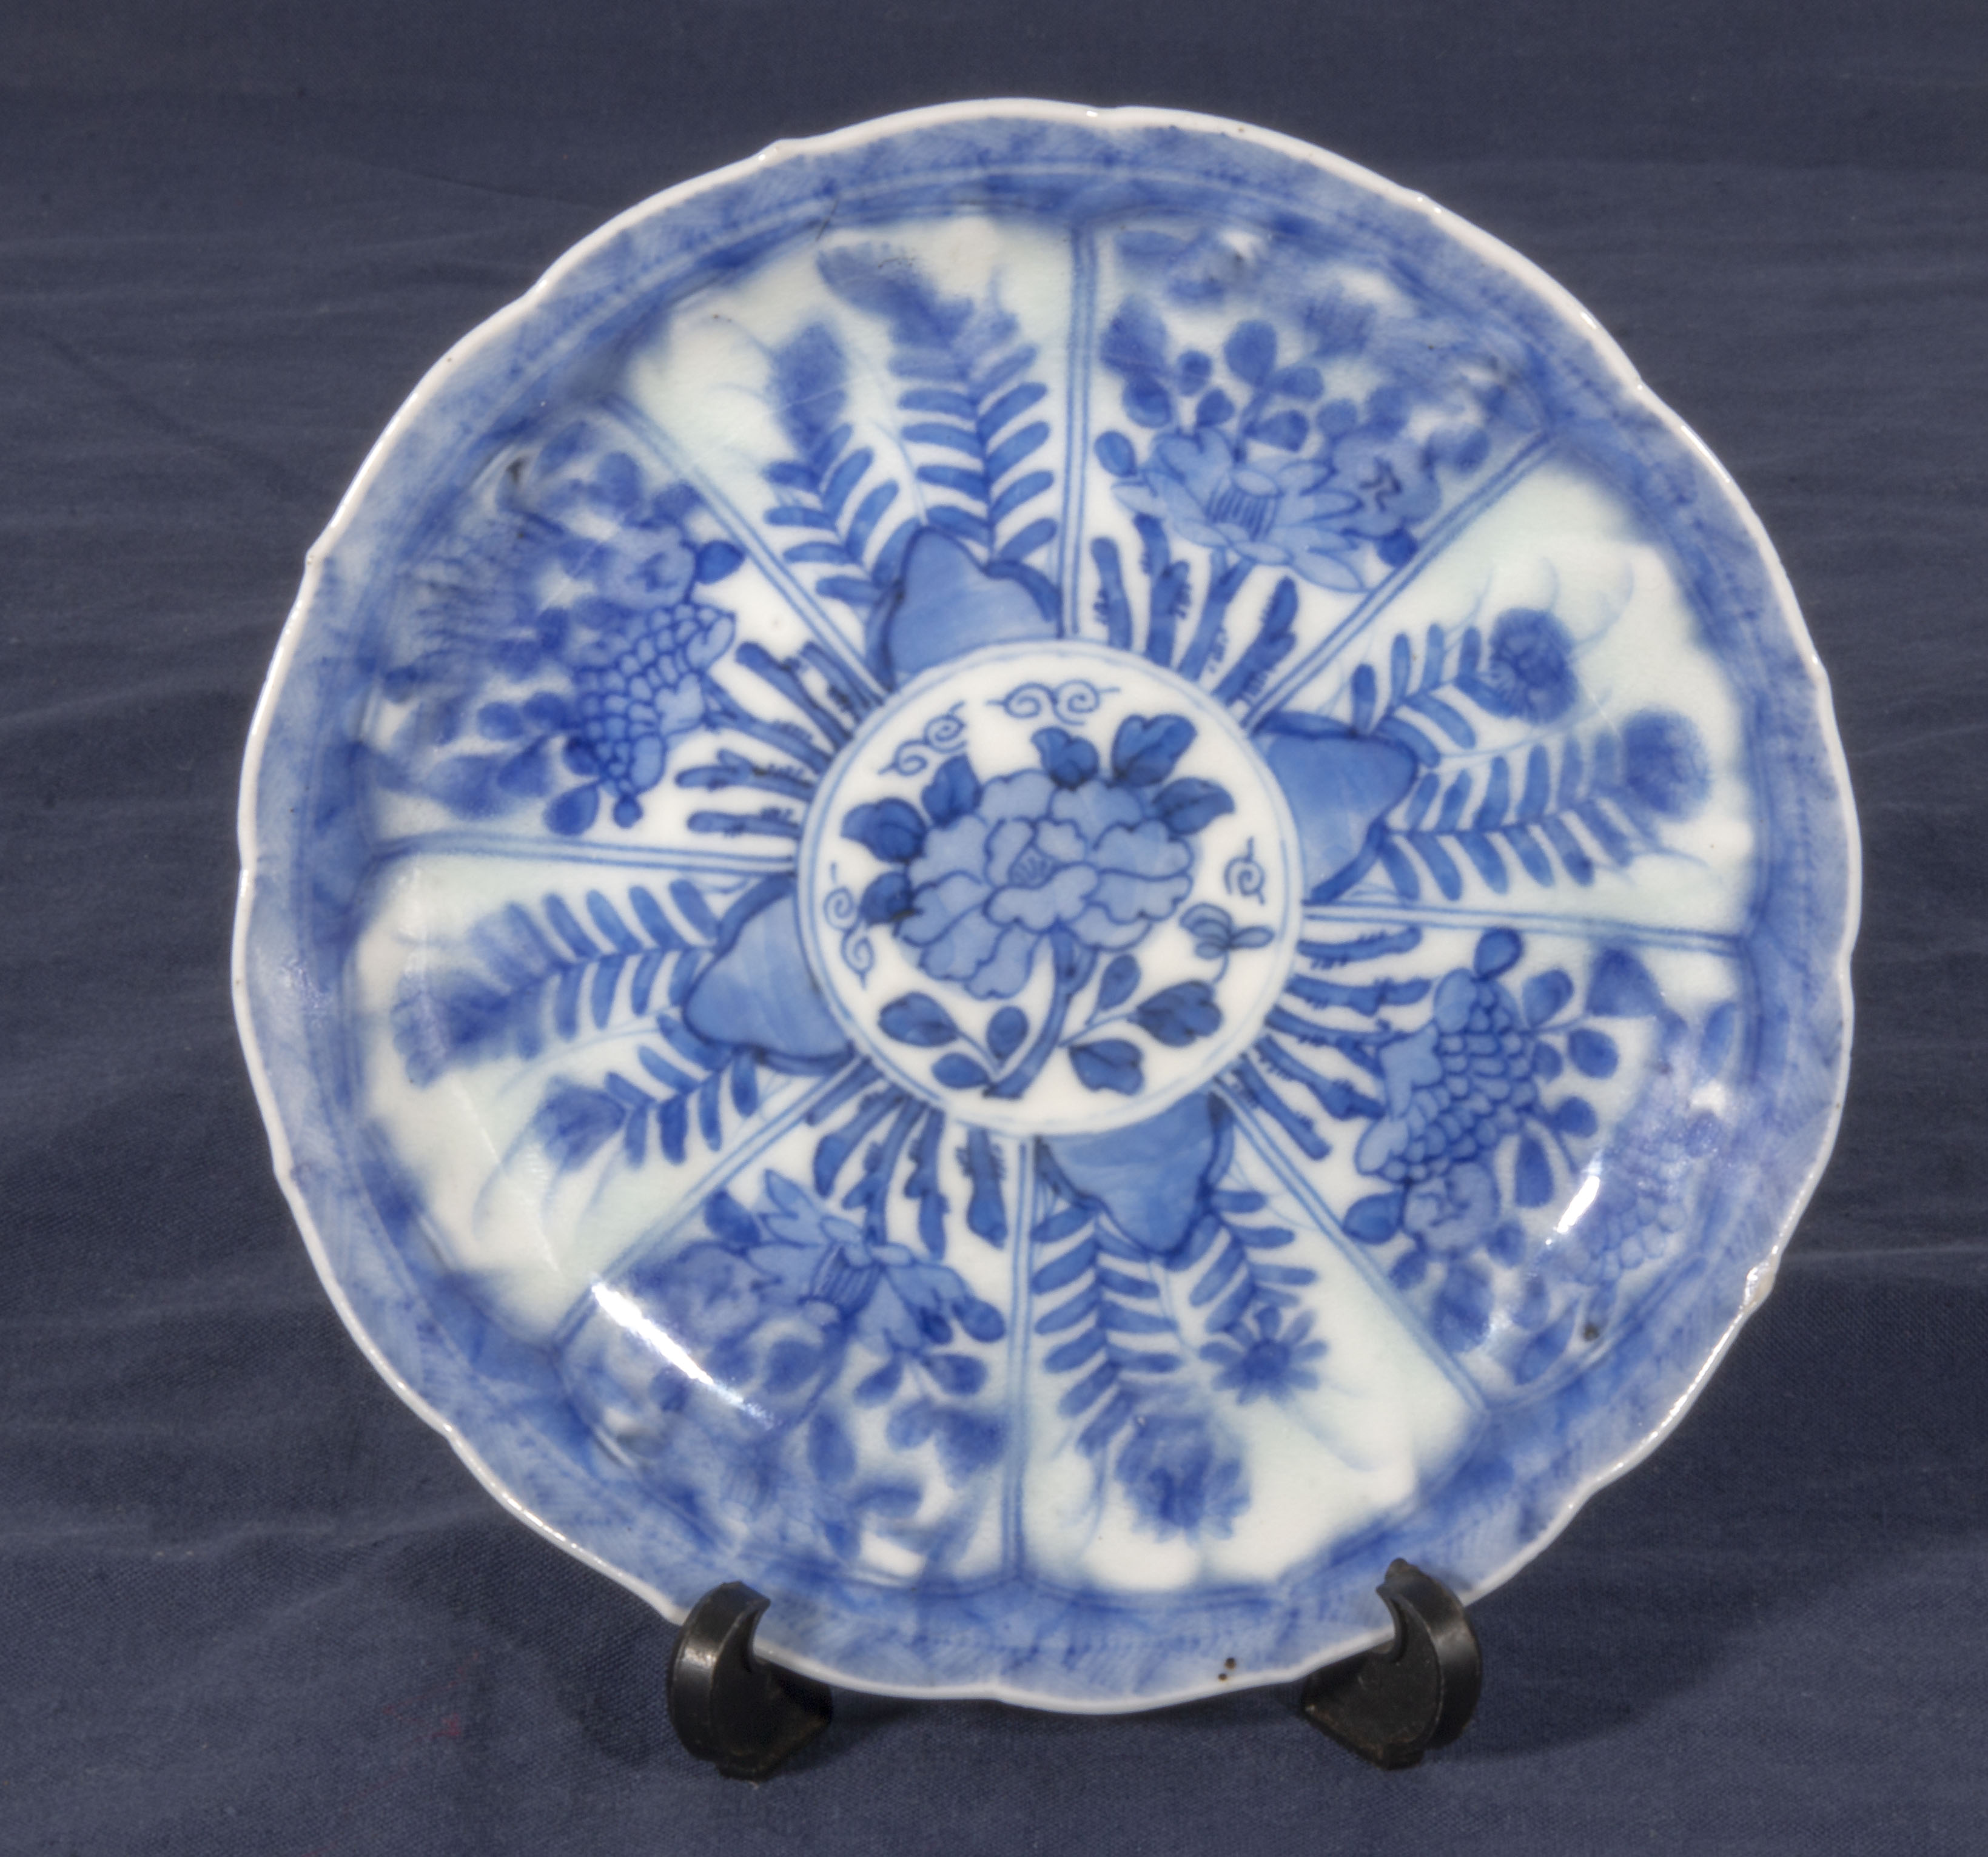 An antique Chinese blue and white decorated dish depicting flowers in panels, double ring mark and